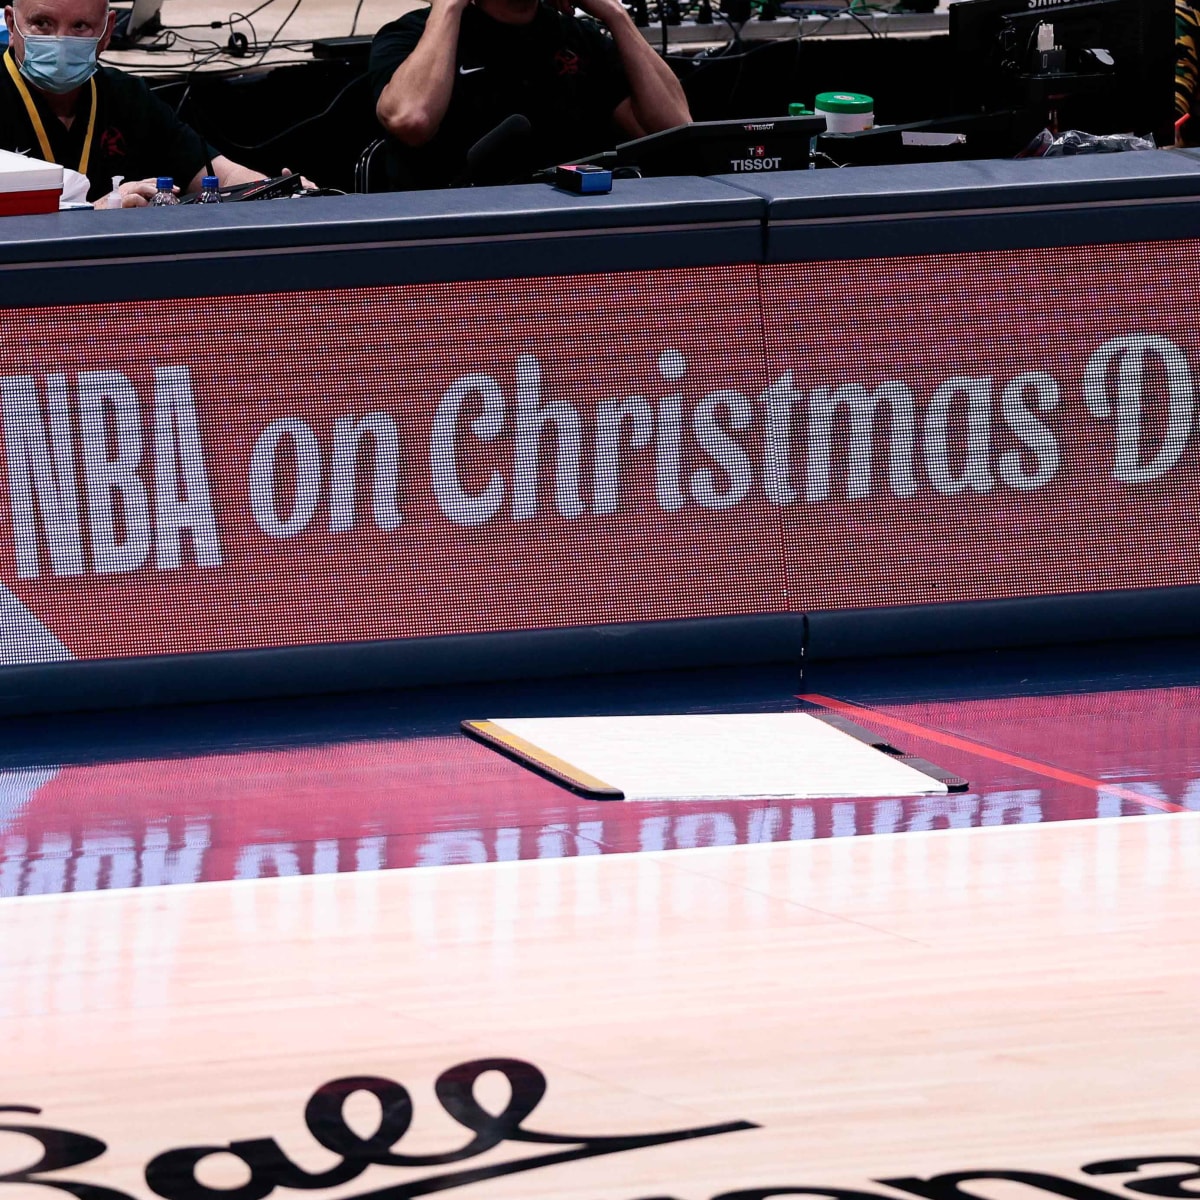 NBA Christmas Day 2022: Know tip-off times, livestream schedule and the  international stars to watch